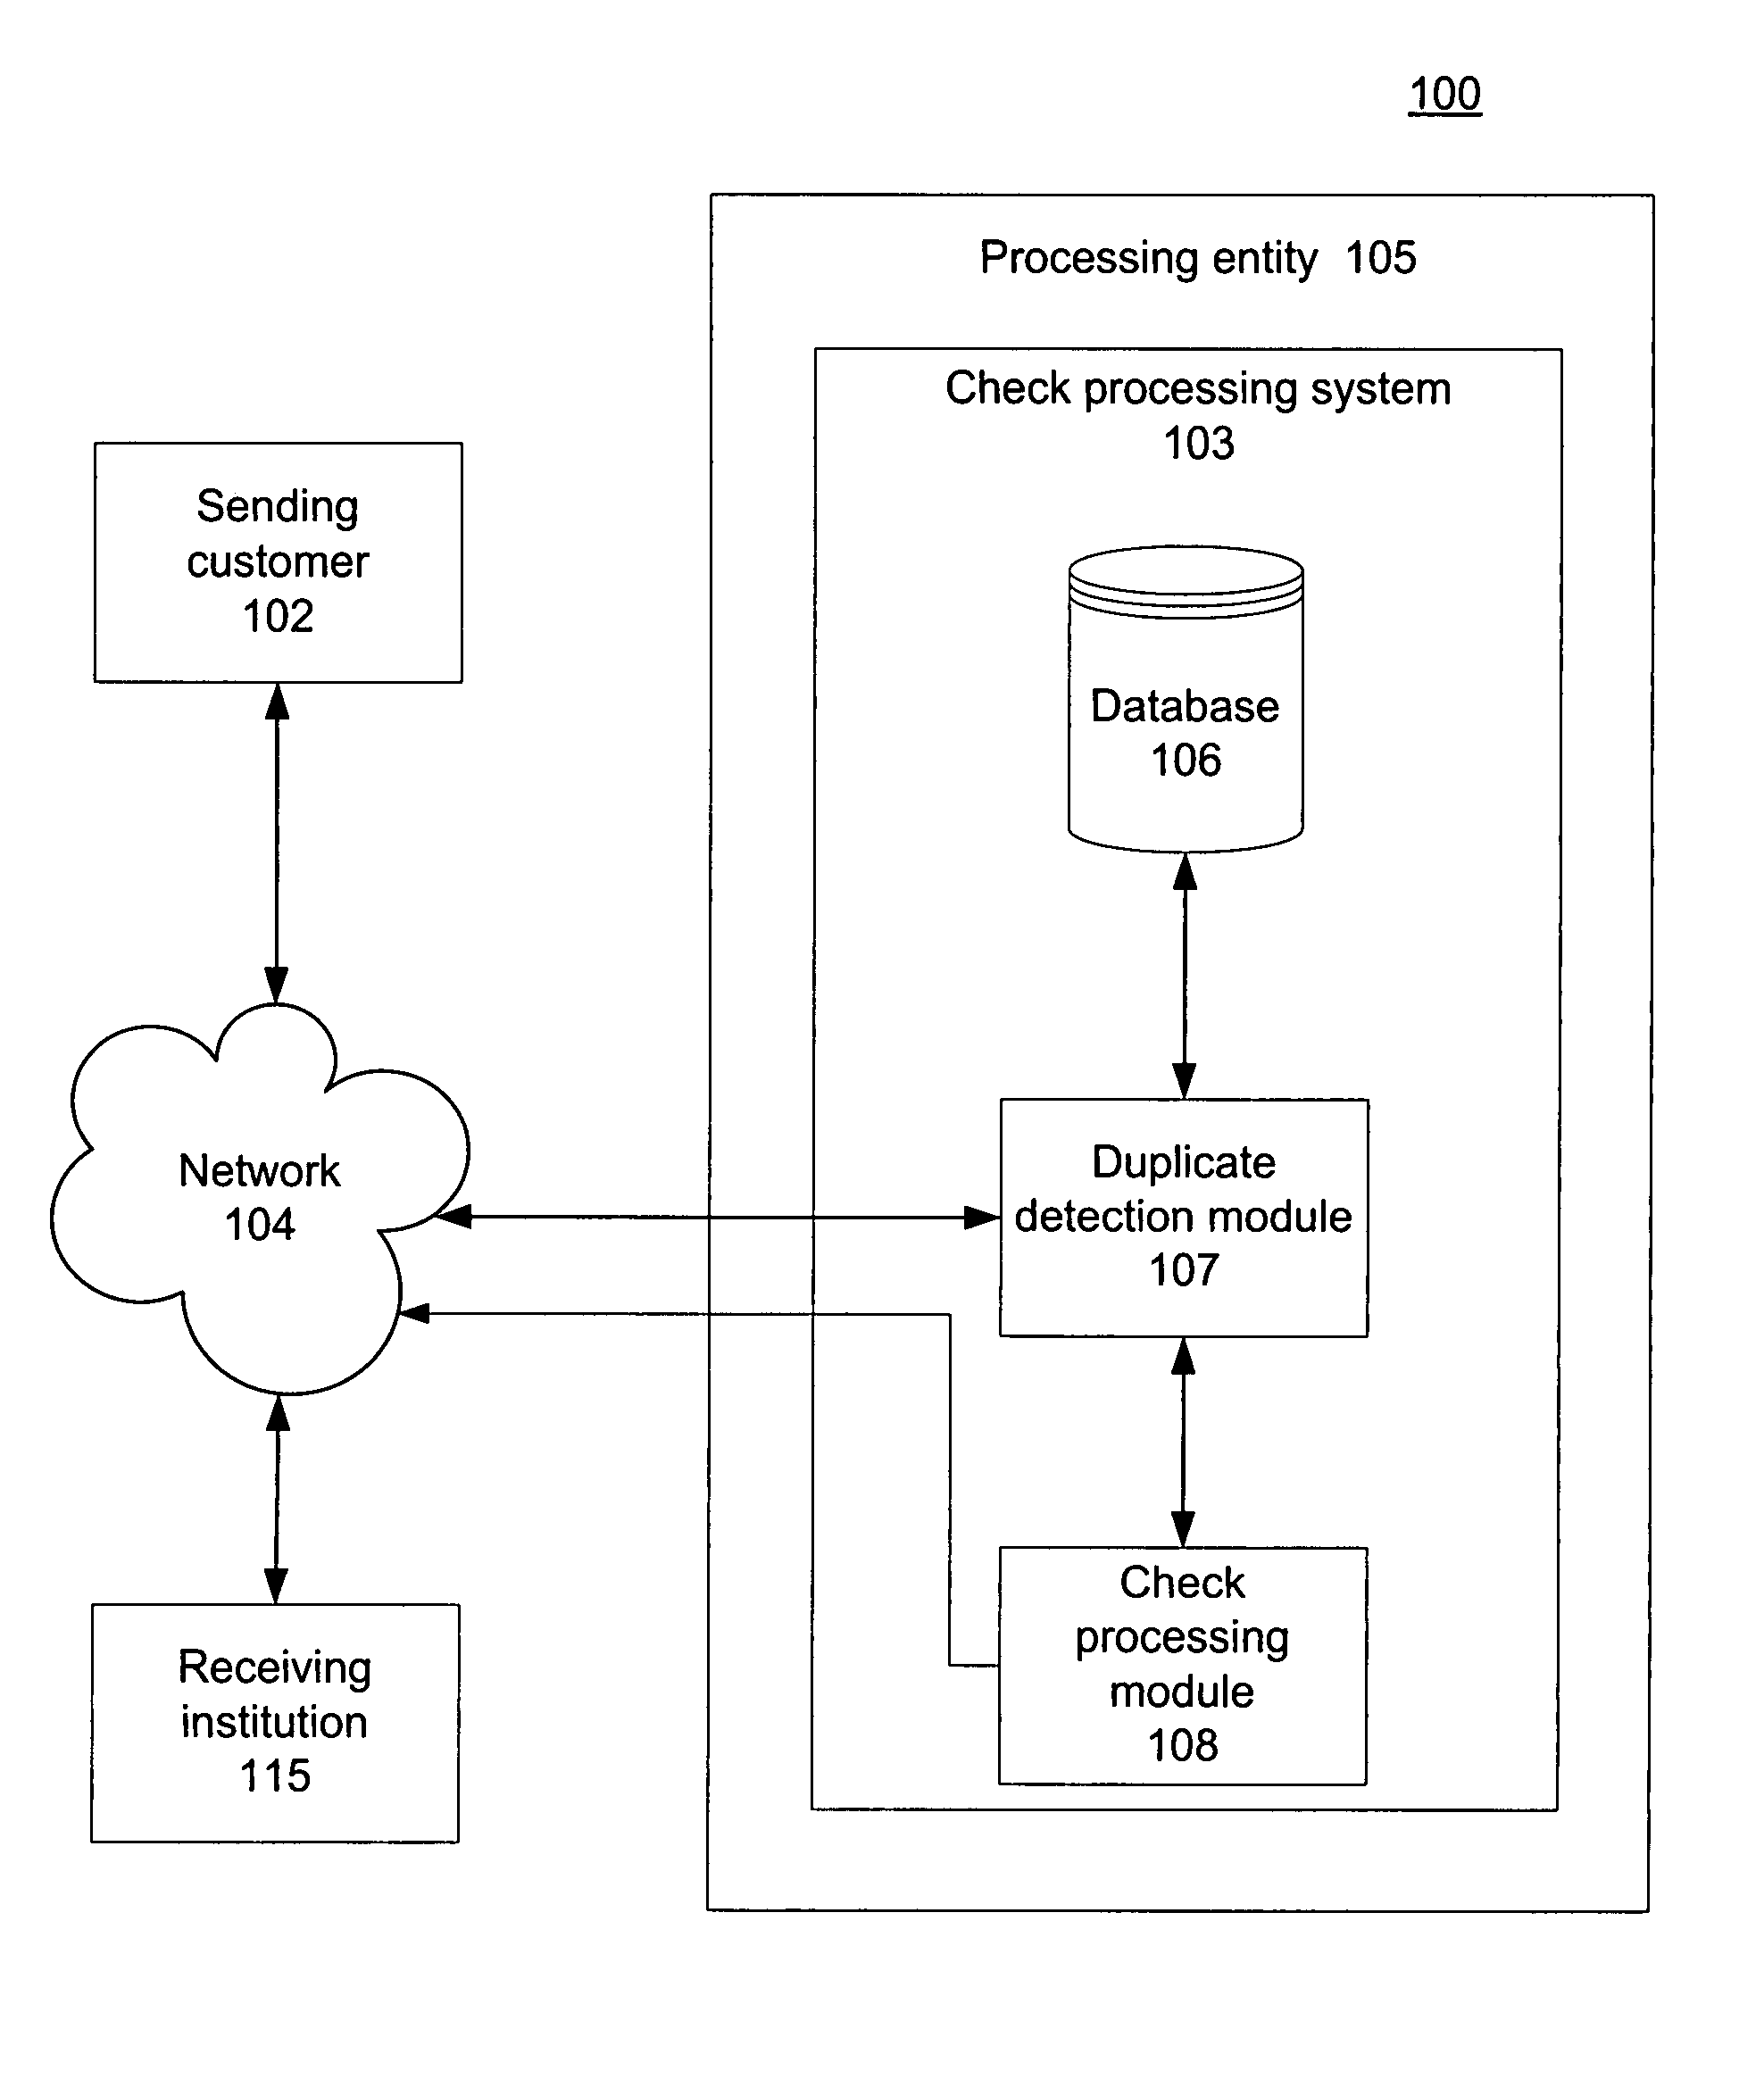 Systems and methods for preventing duplicative electronic check processing